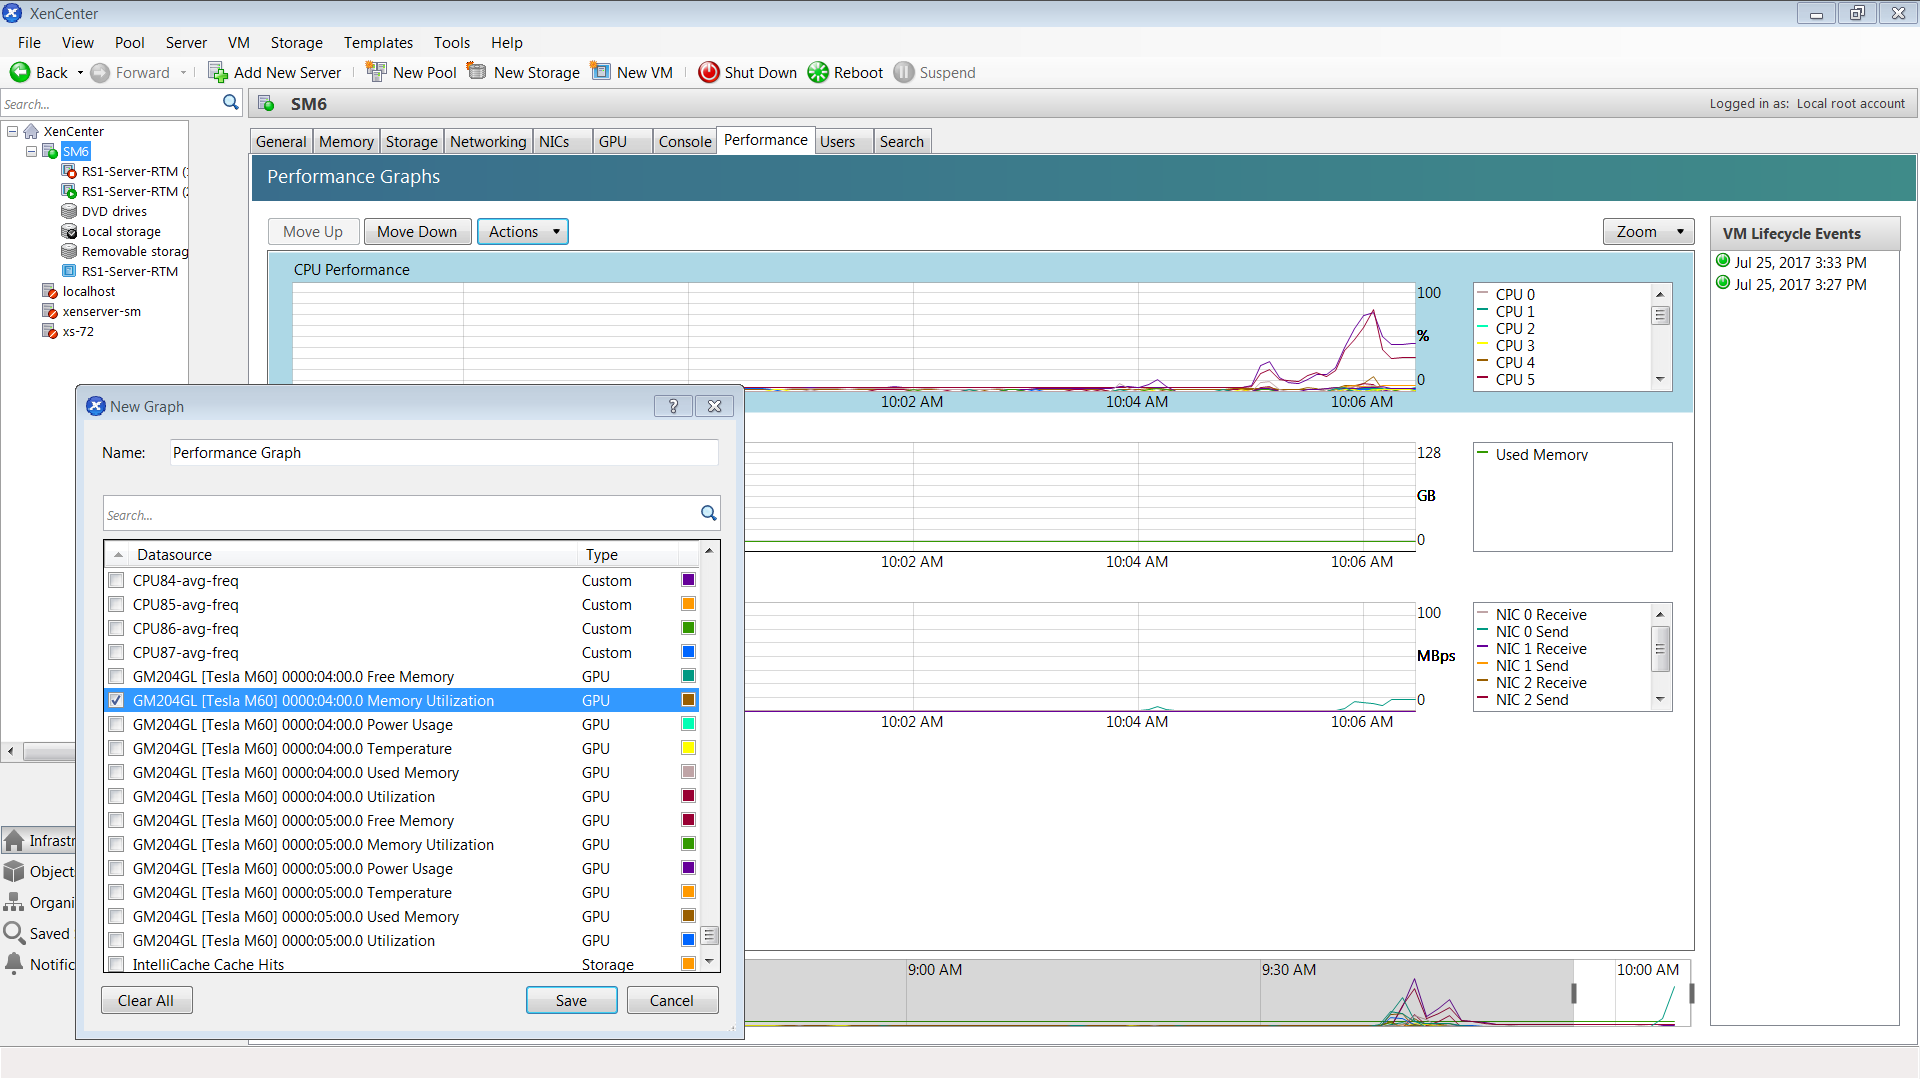 Screen capture of Citrix Xencenter showing GPU performance graphs